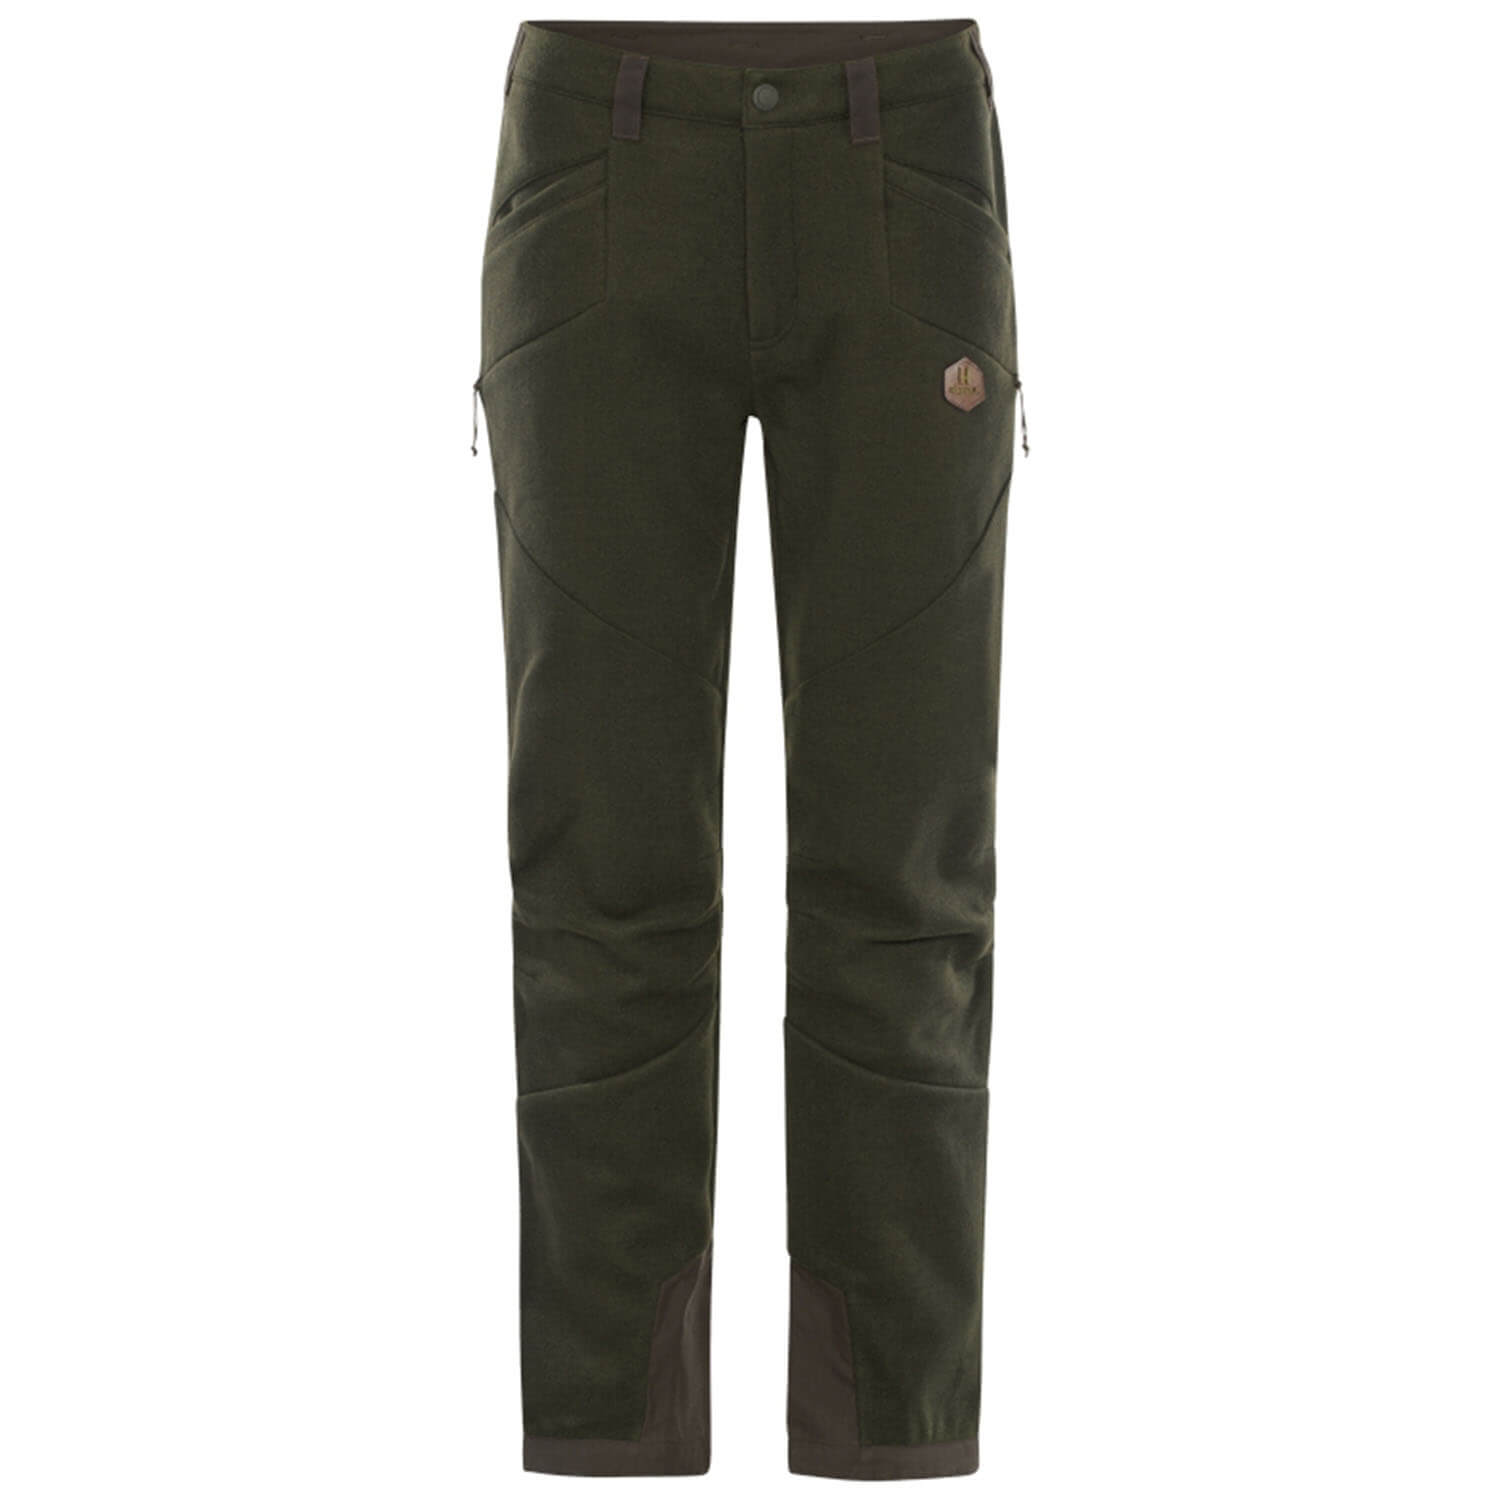 Härkila womens lodentrousers Metso hybrid - Hunting Trousers